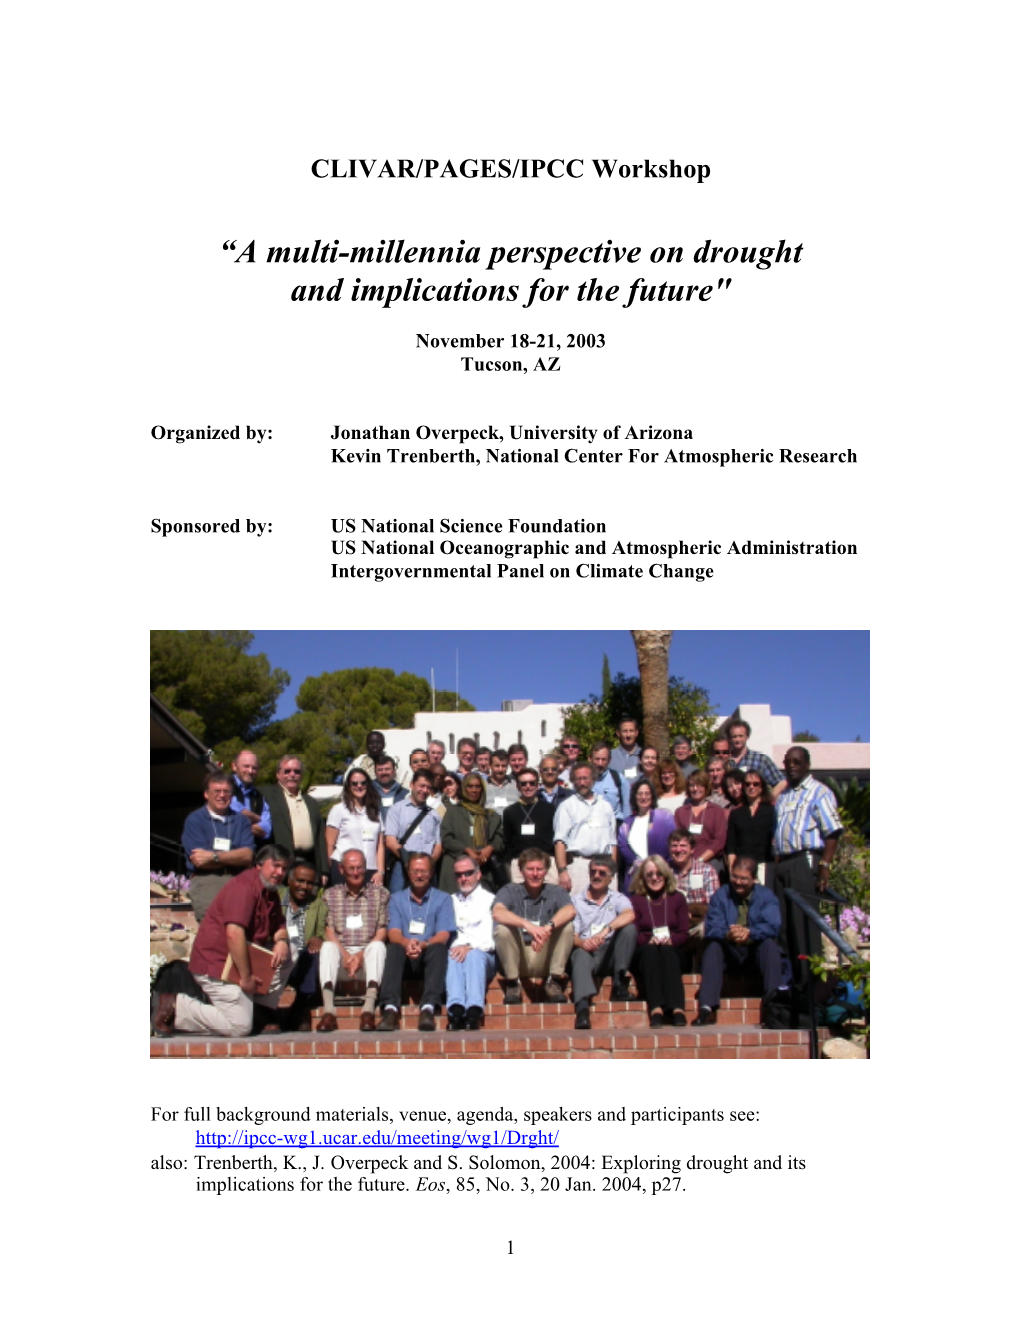 CLIVAR/PAGES/IPCC Workshop “A Multi-Millennia Perspective on Drought and Implications for the Future” November 18-21, 2003 Tucson, AZ